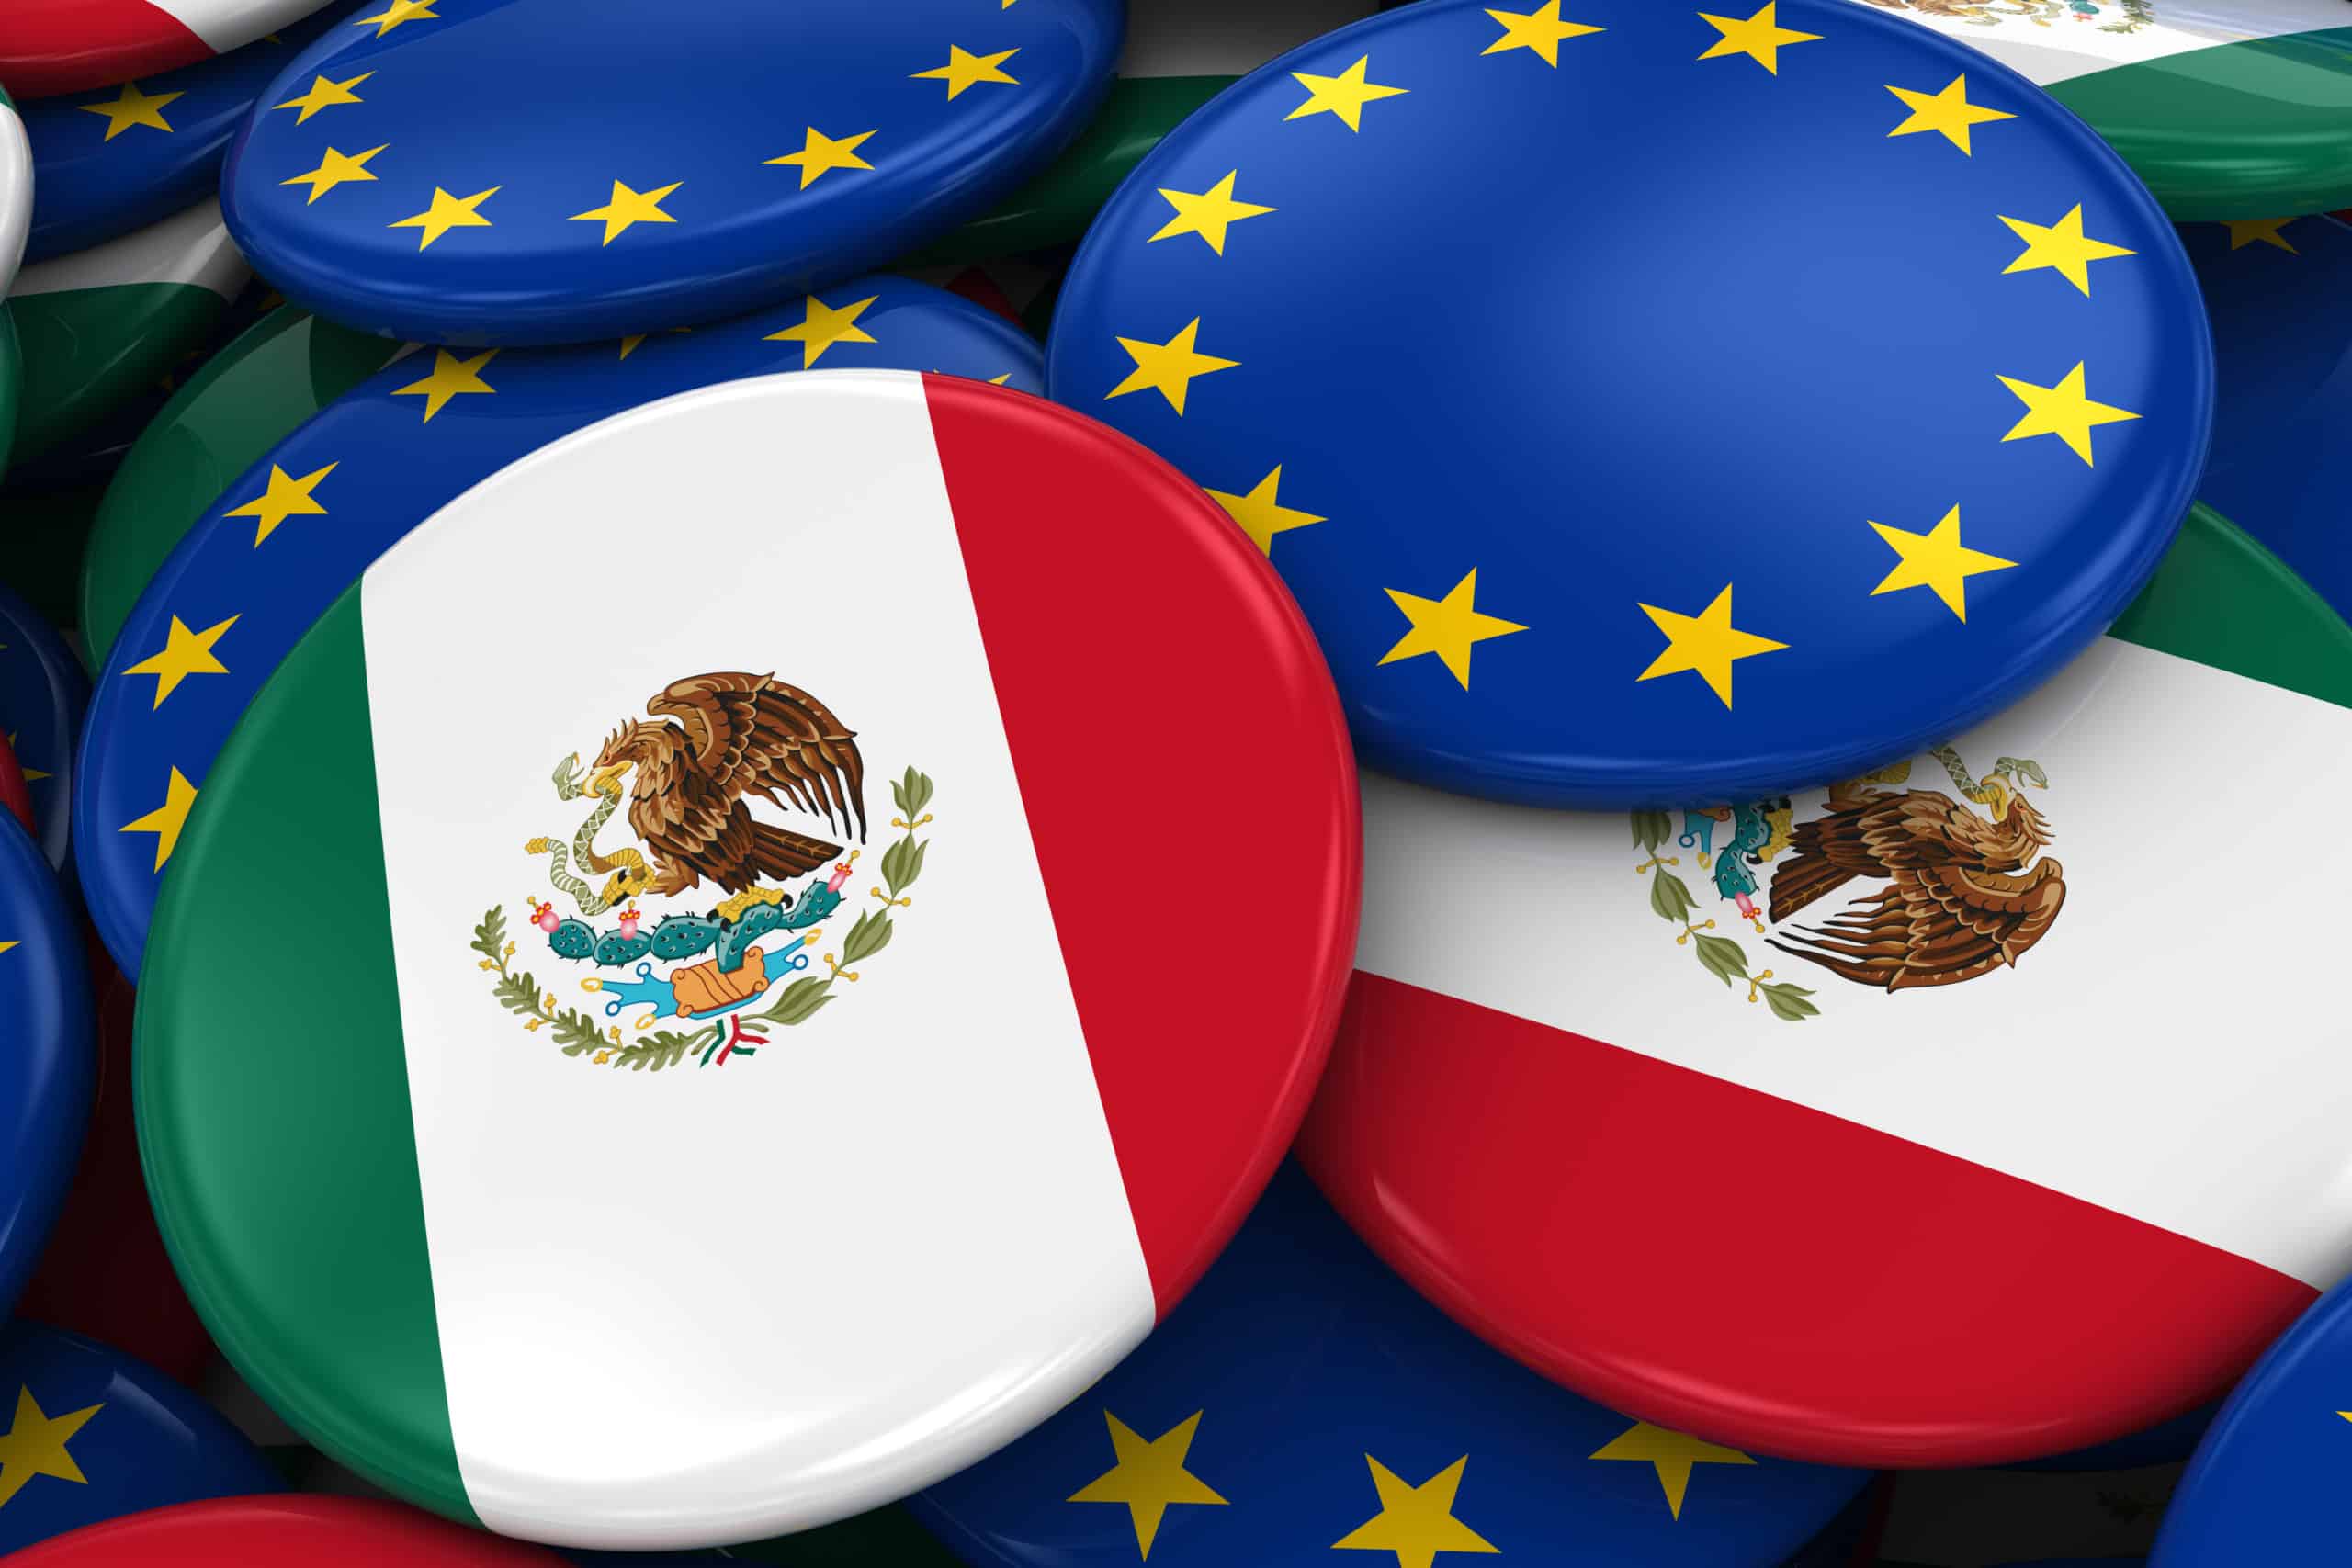 Episode 96: Mexico and the European Union – How to Strengthen Opportunities in the Era of Strategic Autonomy? With H.E. Rogelio Granguillhome